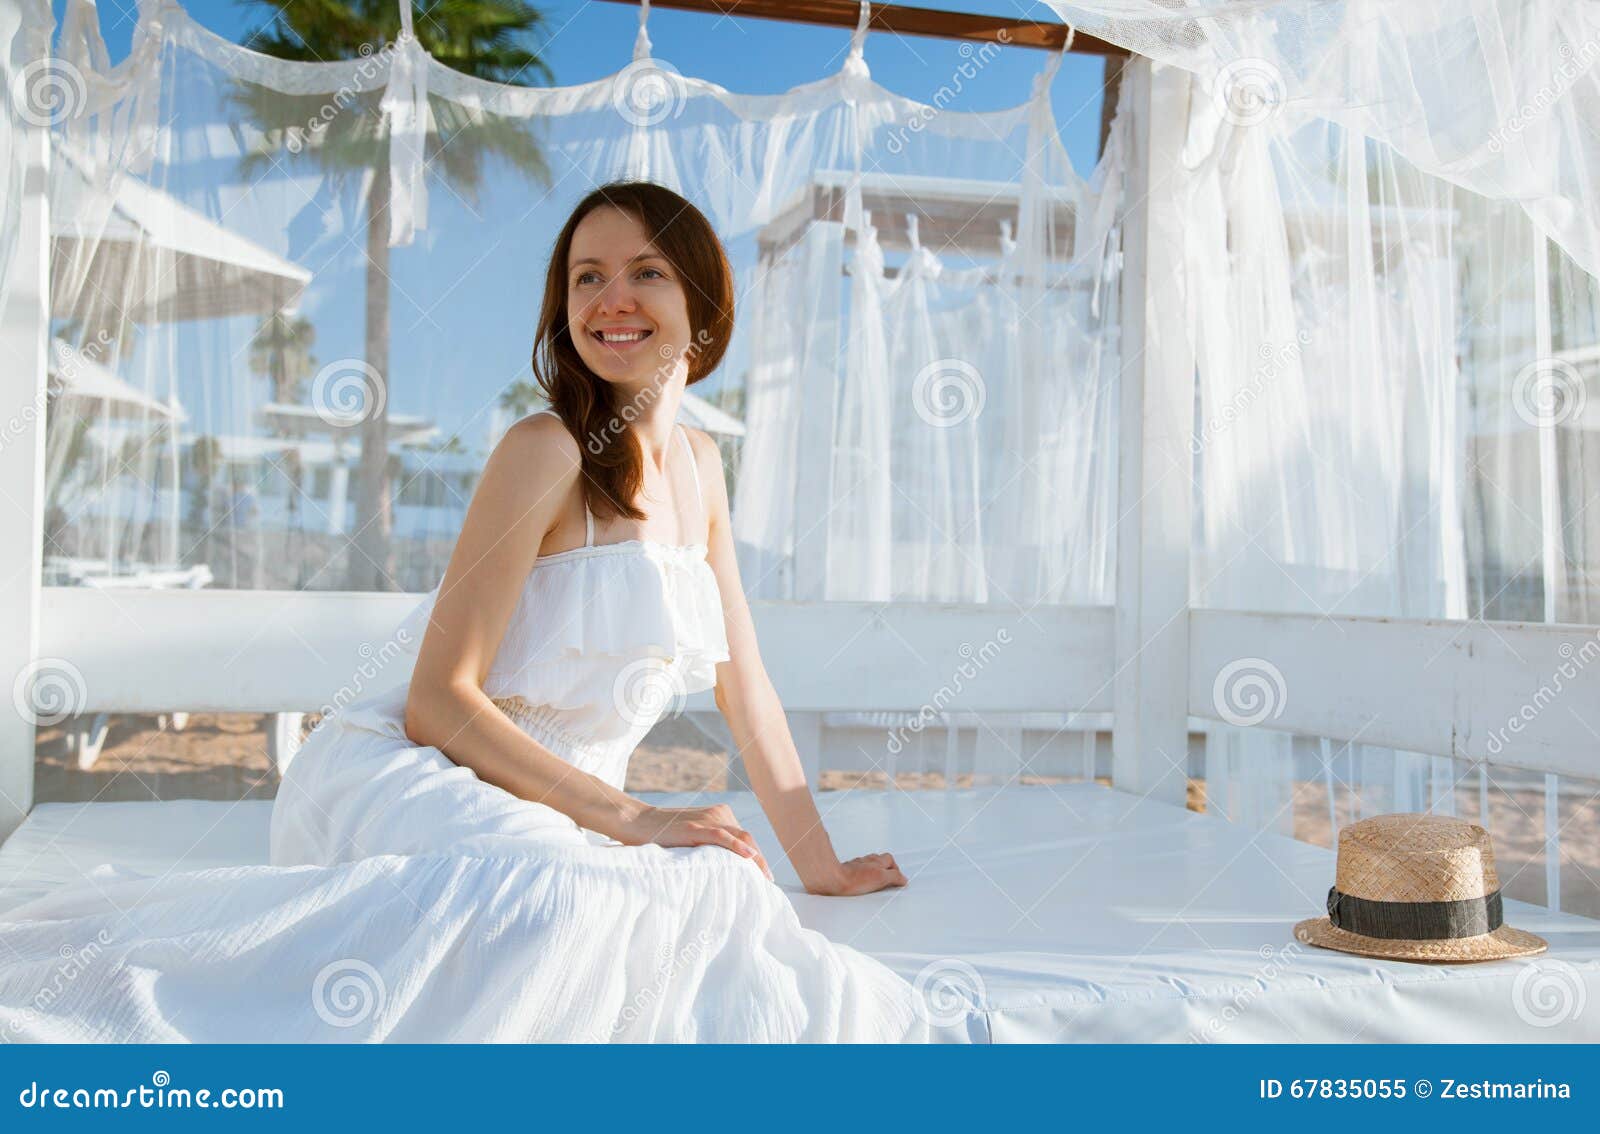 smiling young woman sitting under white baldachin